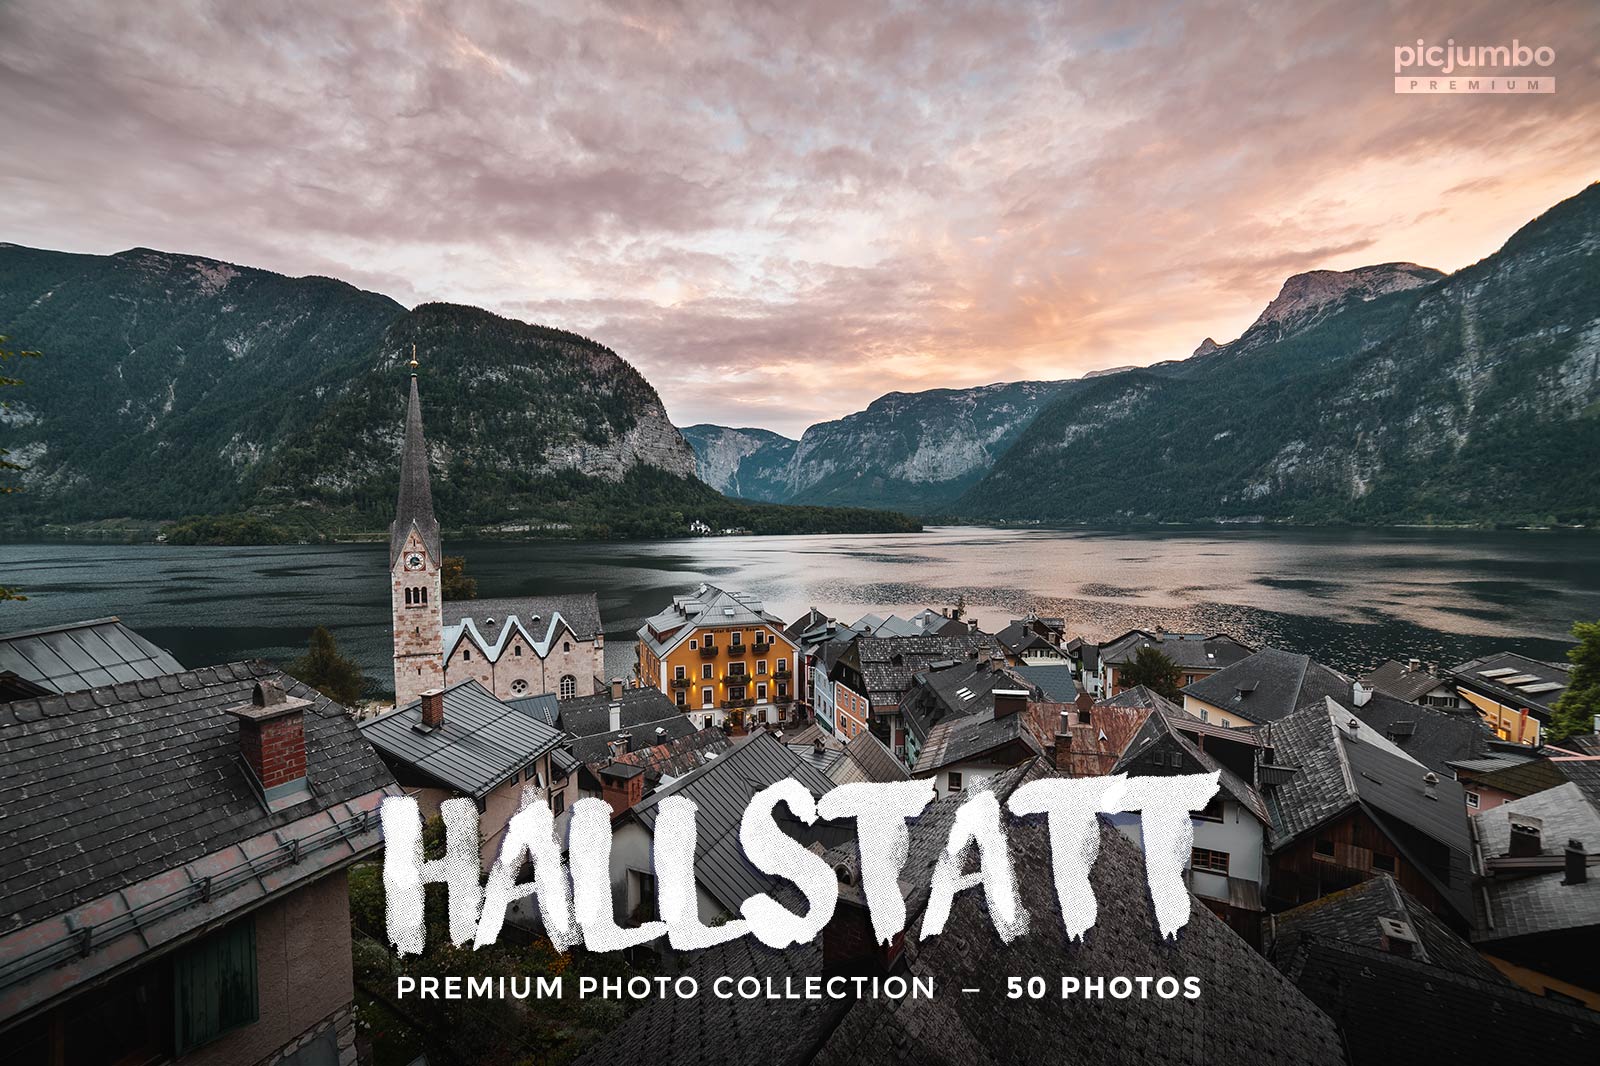 Download hi-res stock photos from our Hallstatt PREMIUM Collection!